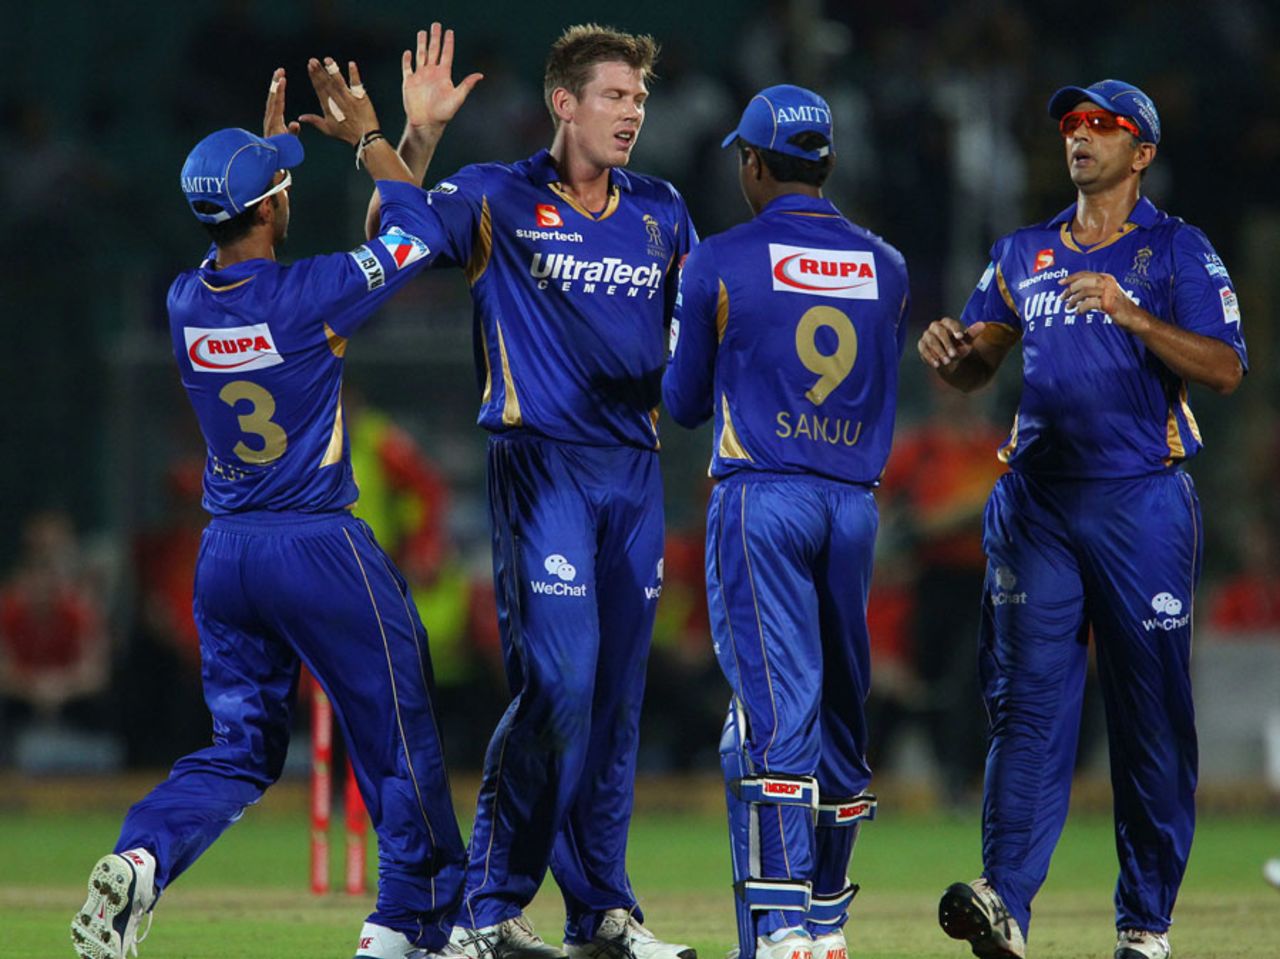 James Faulkner celebrates a wicket with his Rajasthan Royals team-mates, Perth Scorchers v Rajasthan Royals, Group A, Champions League 2013, Jaipur, September 29, 2013